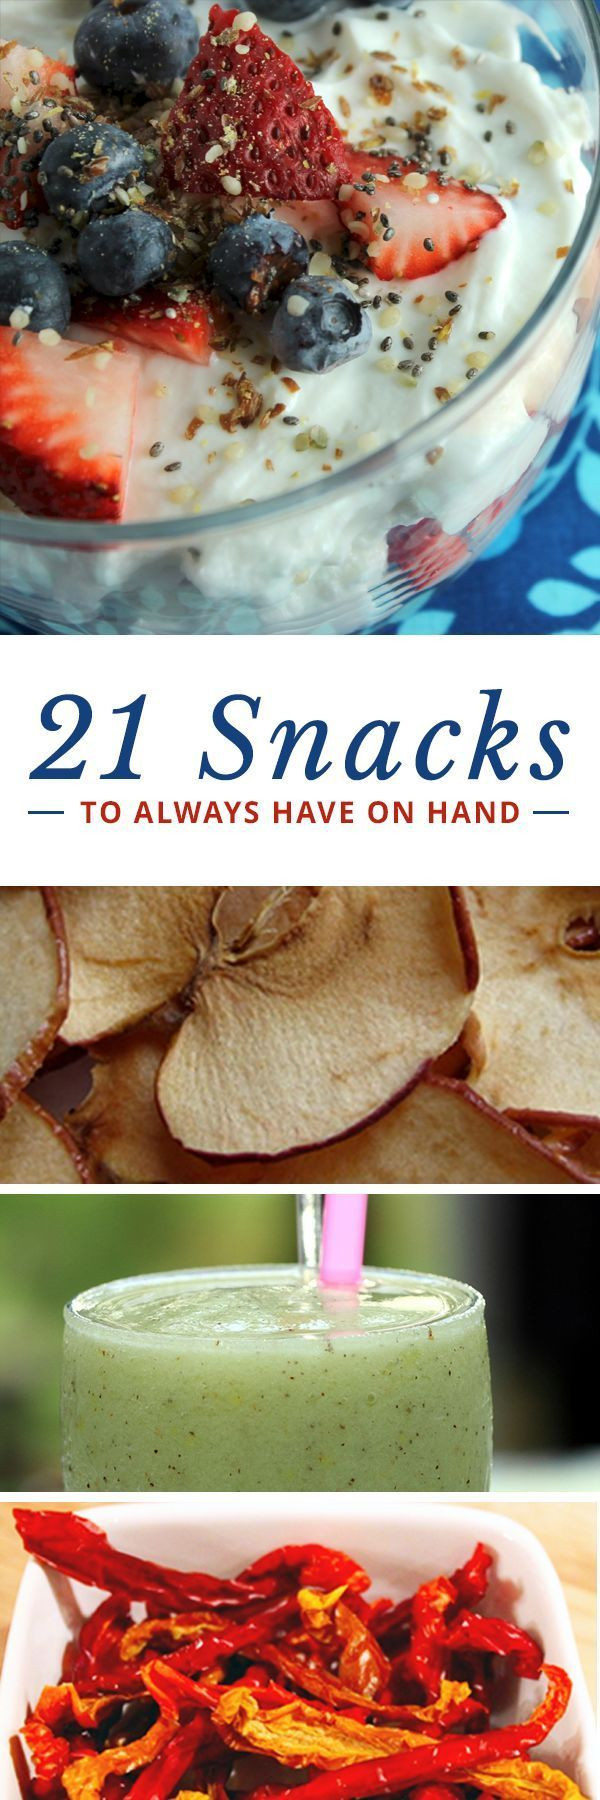 Healthy Low Cal Snacks
 21 Low Calorie Snacks to Always Have on Hand